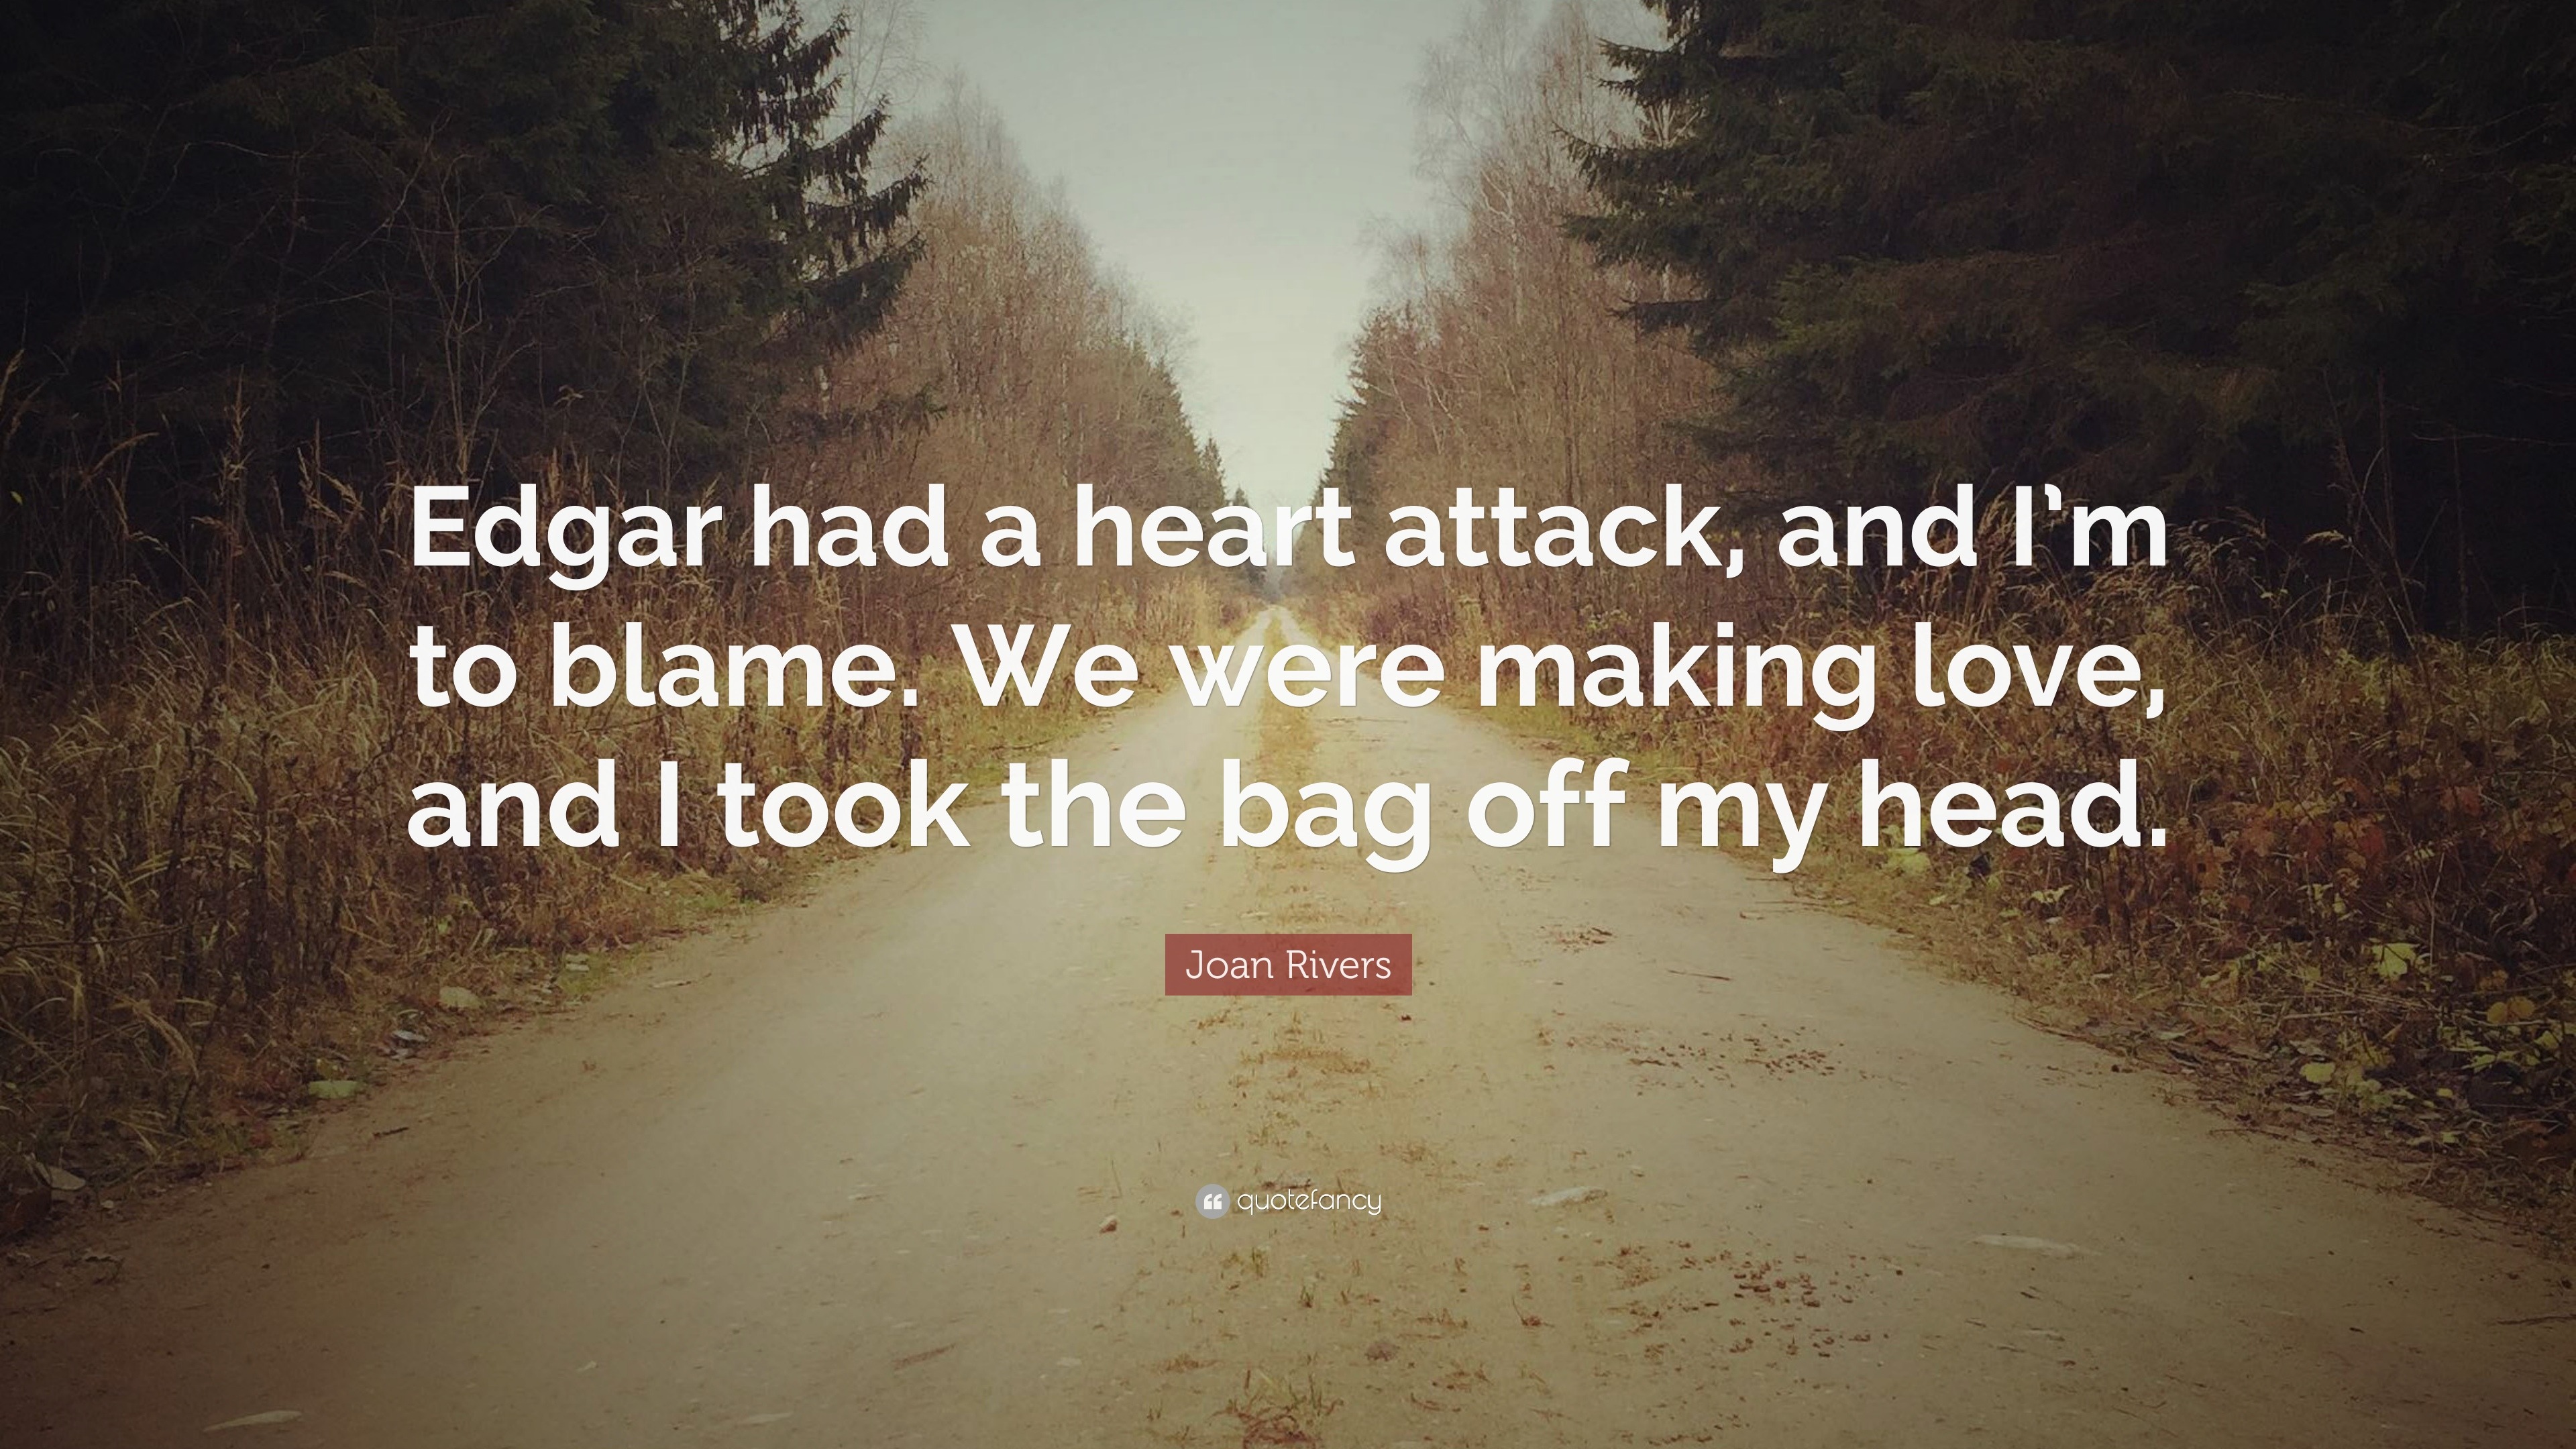 Joan Rivers Quote “Edgar had a heart and I m to